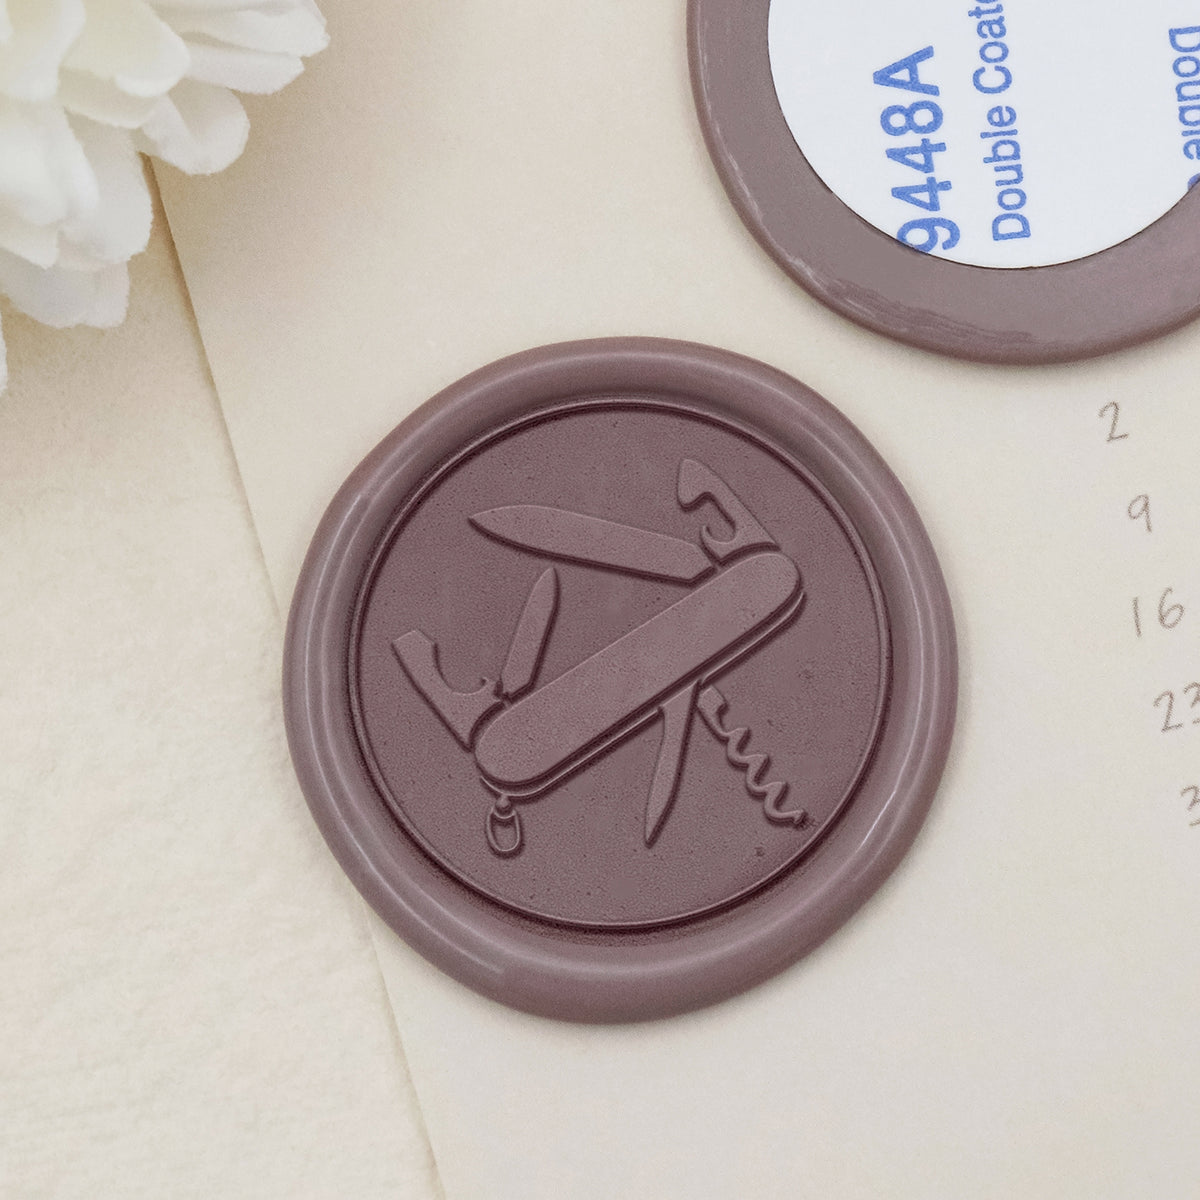 Ready Made Adhesive Wax Seals Stickers - 3D Relief & Alphabet & Pop  Cultures & Animals & Plants & Holiday - Stamprints